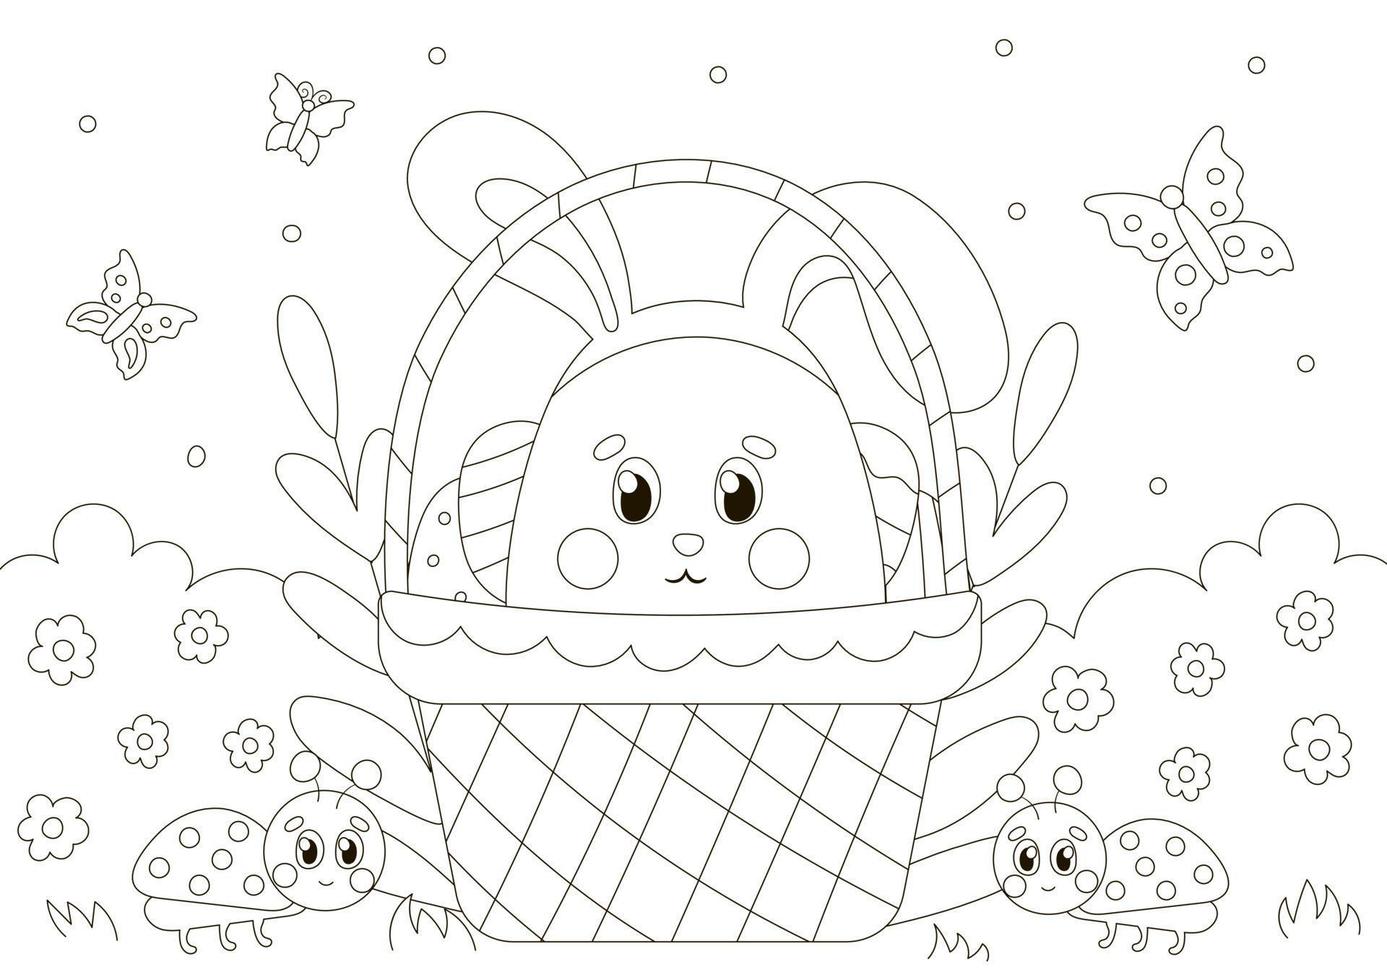 Cute coloring page for easter with bunny character in basket with flowers and butterflies vector